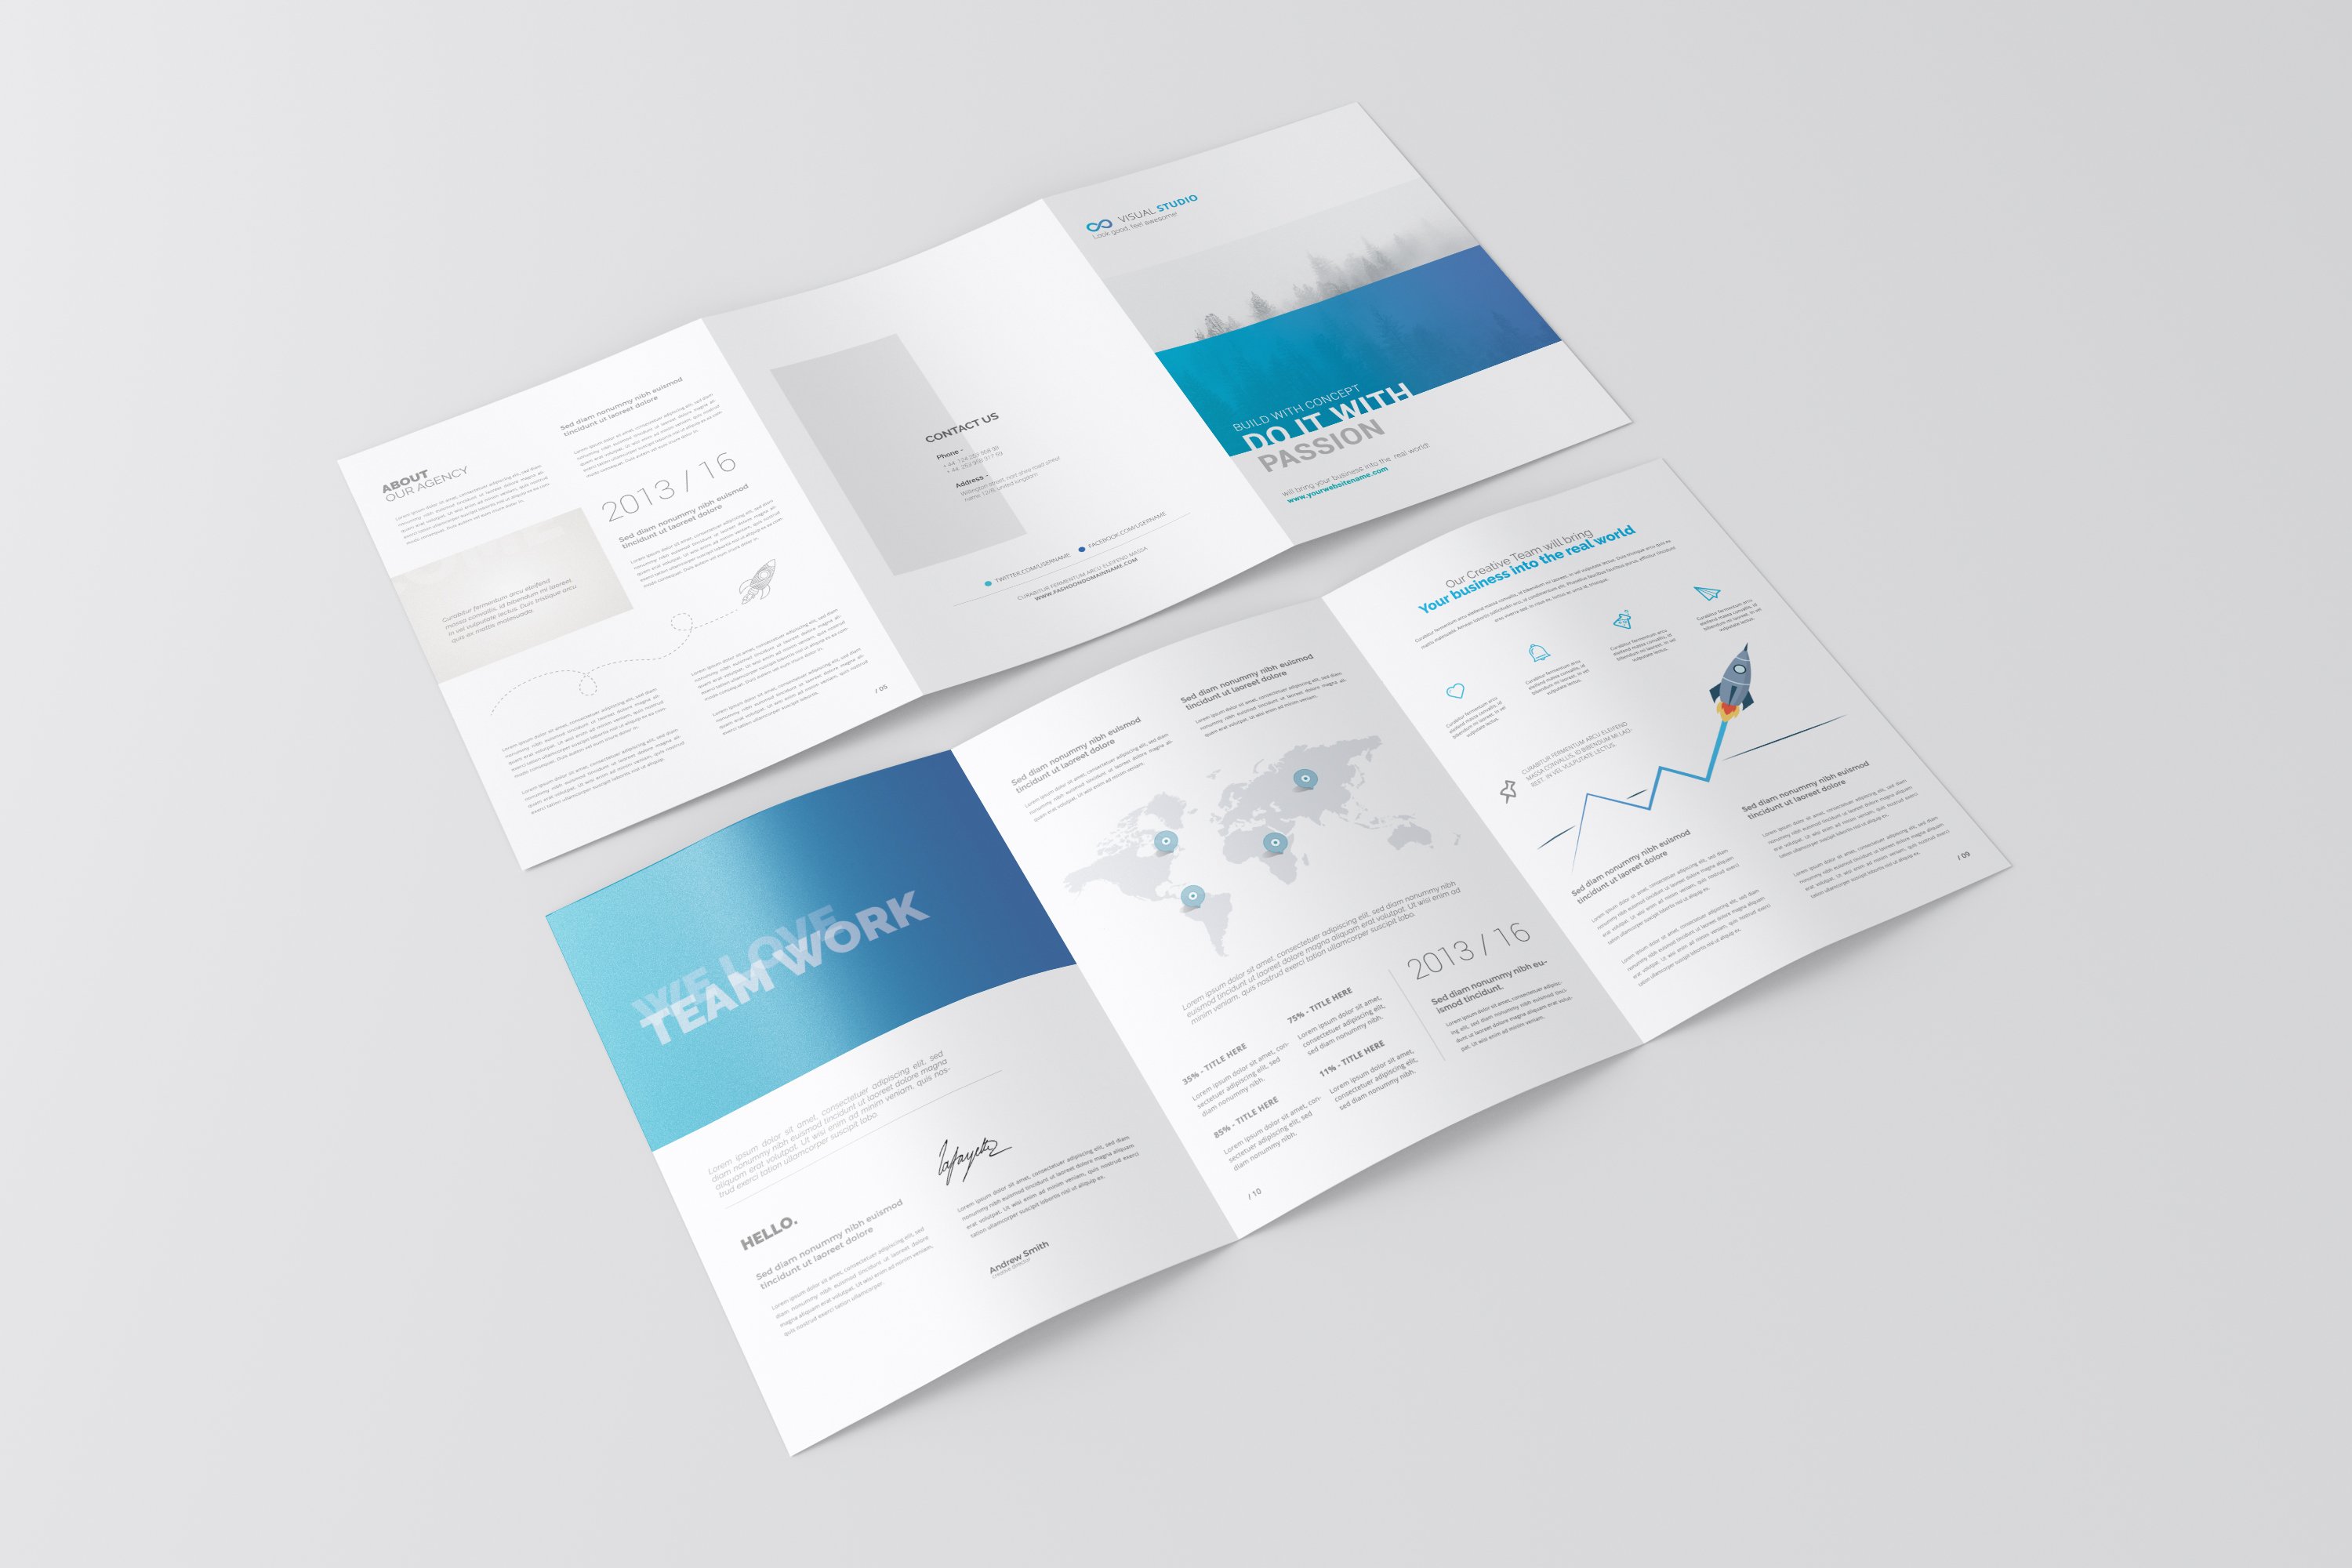 02 a4 3 fold brochure mockup preview 620